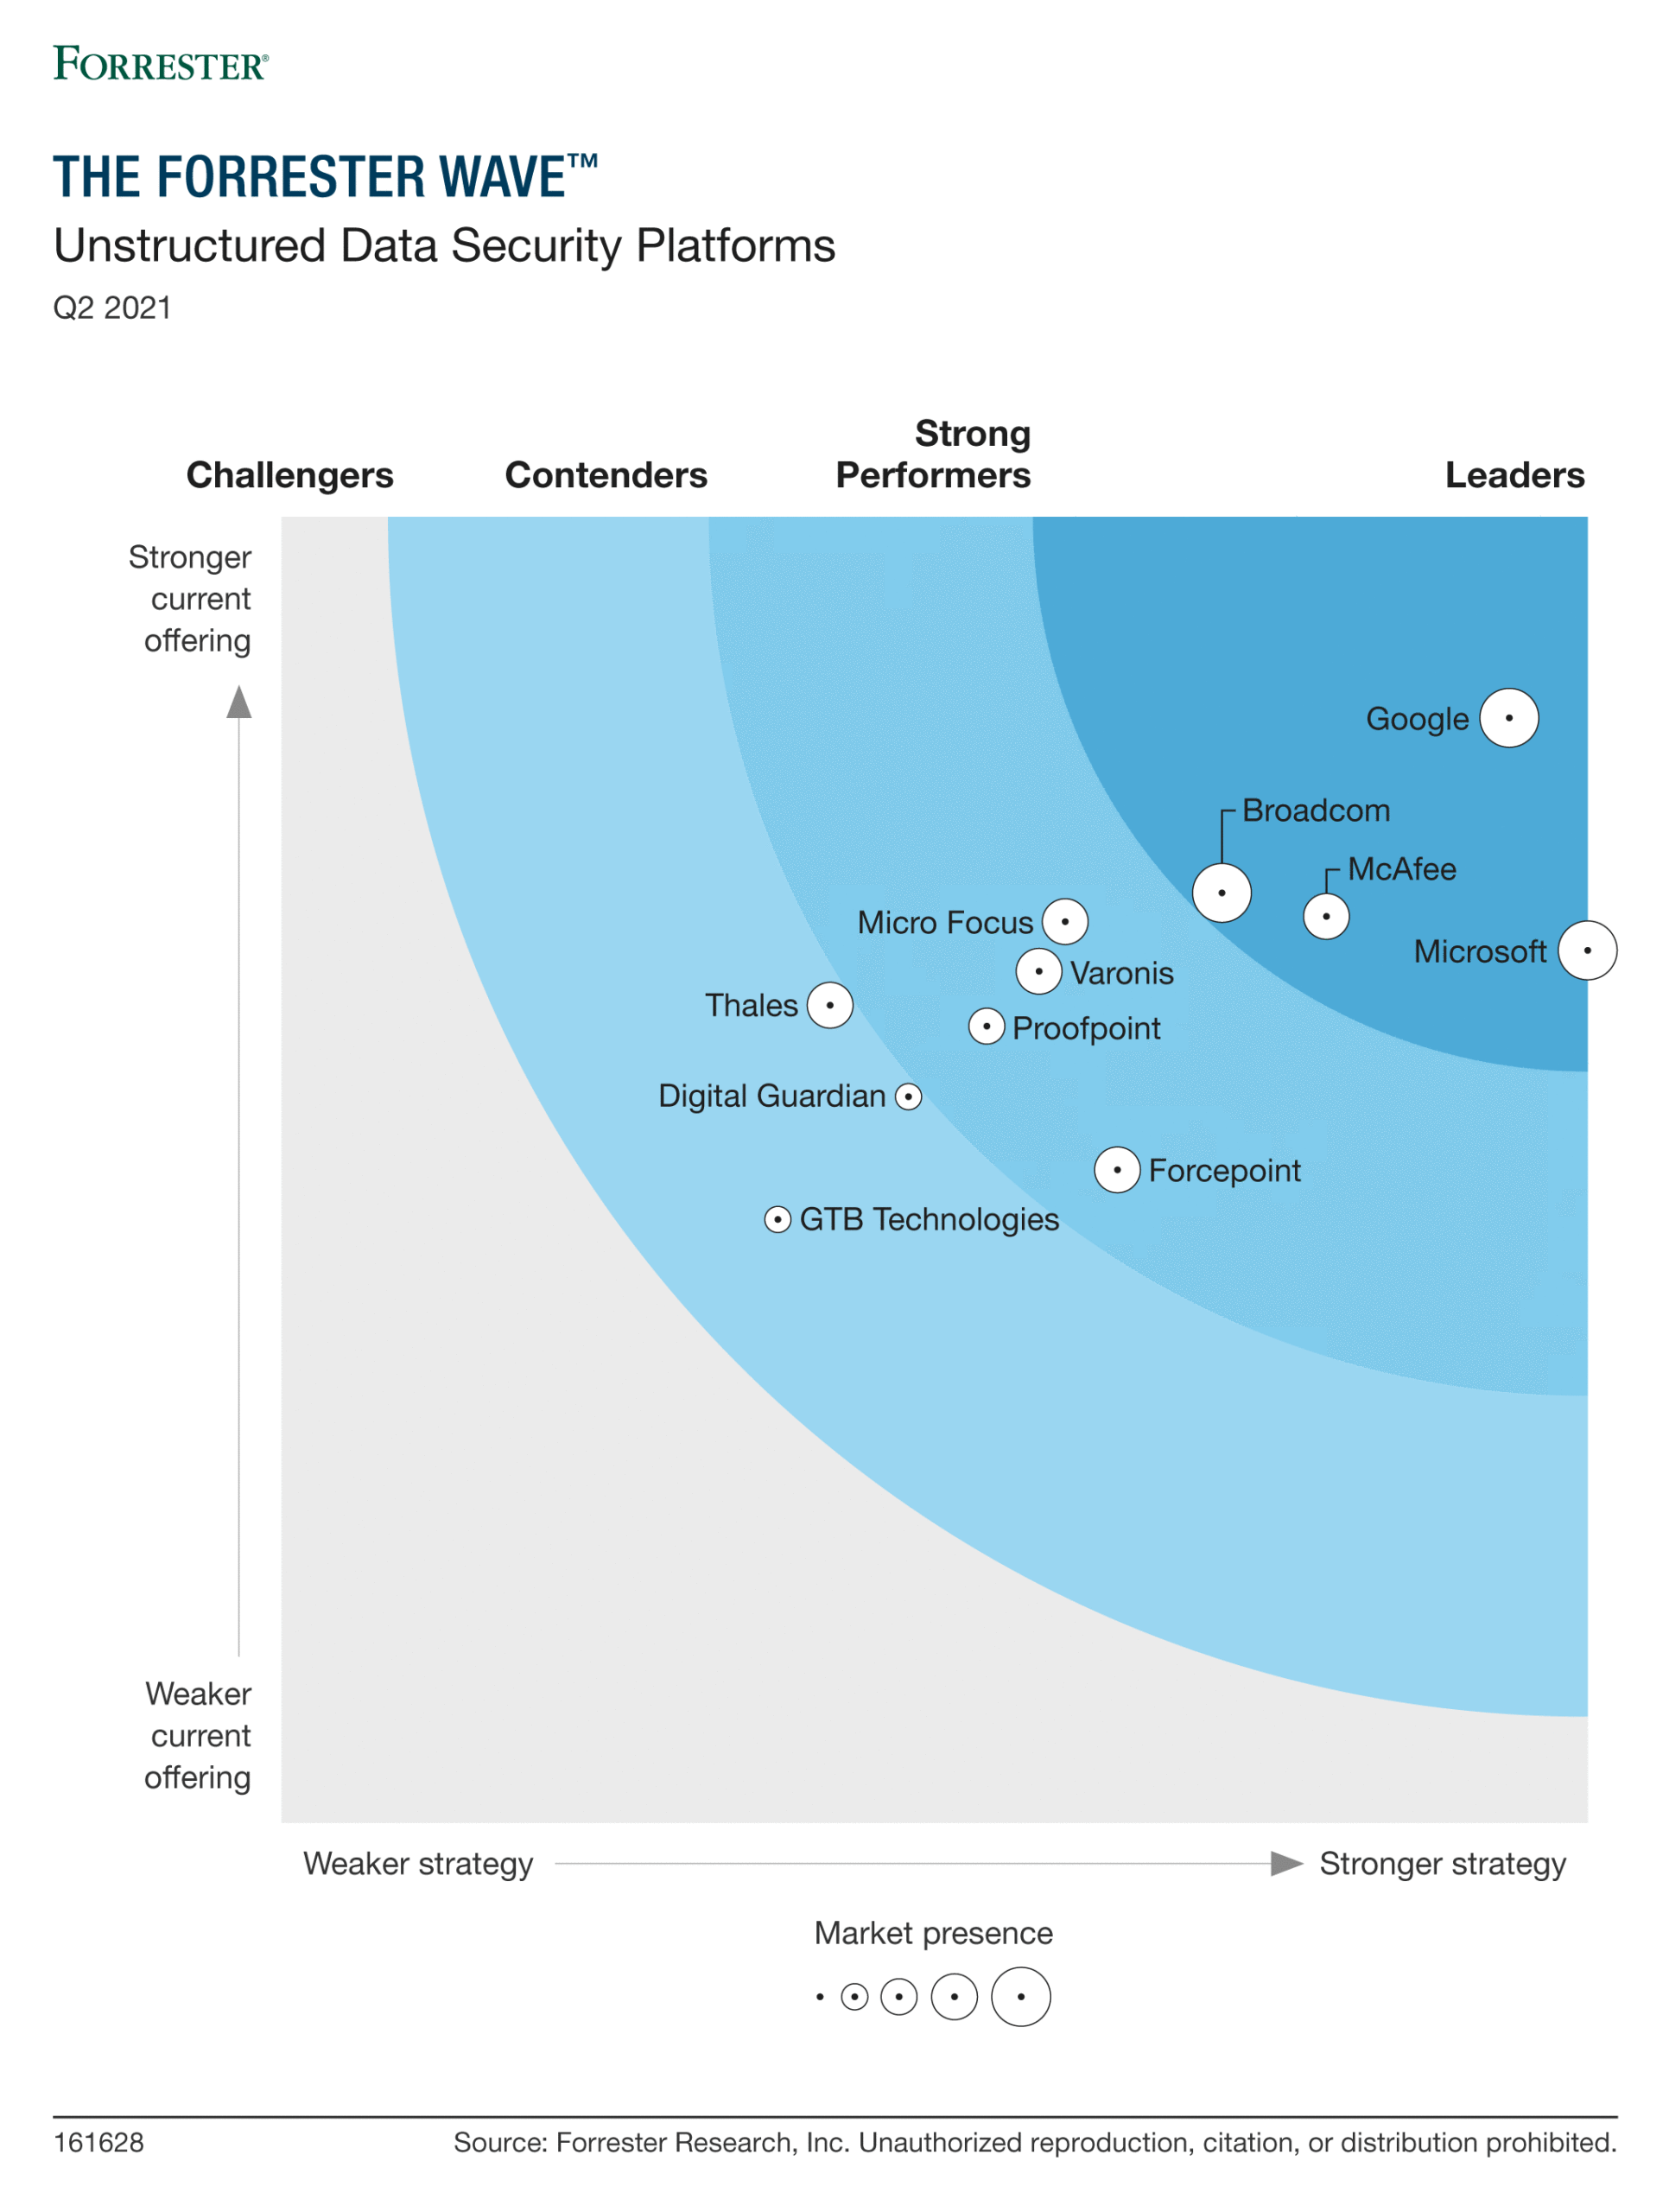 Forrester Wave chart demonstrating the ratings of vendors in the 2021 Wave for Unstructured Data Security Platforms.